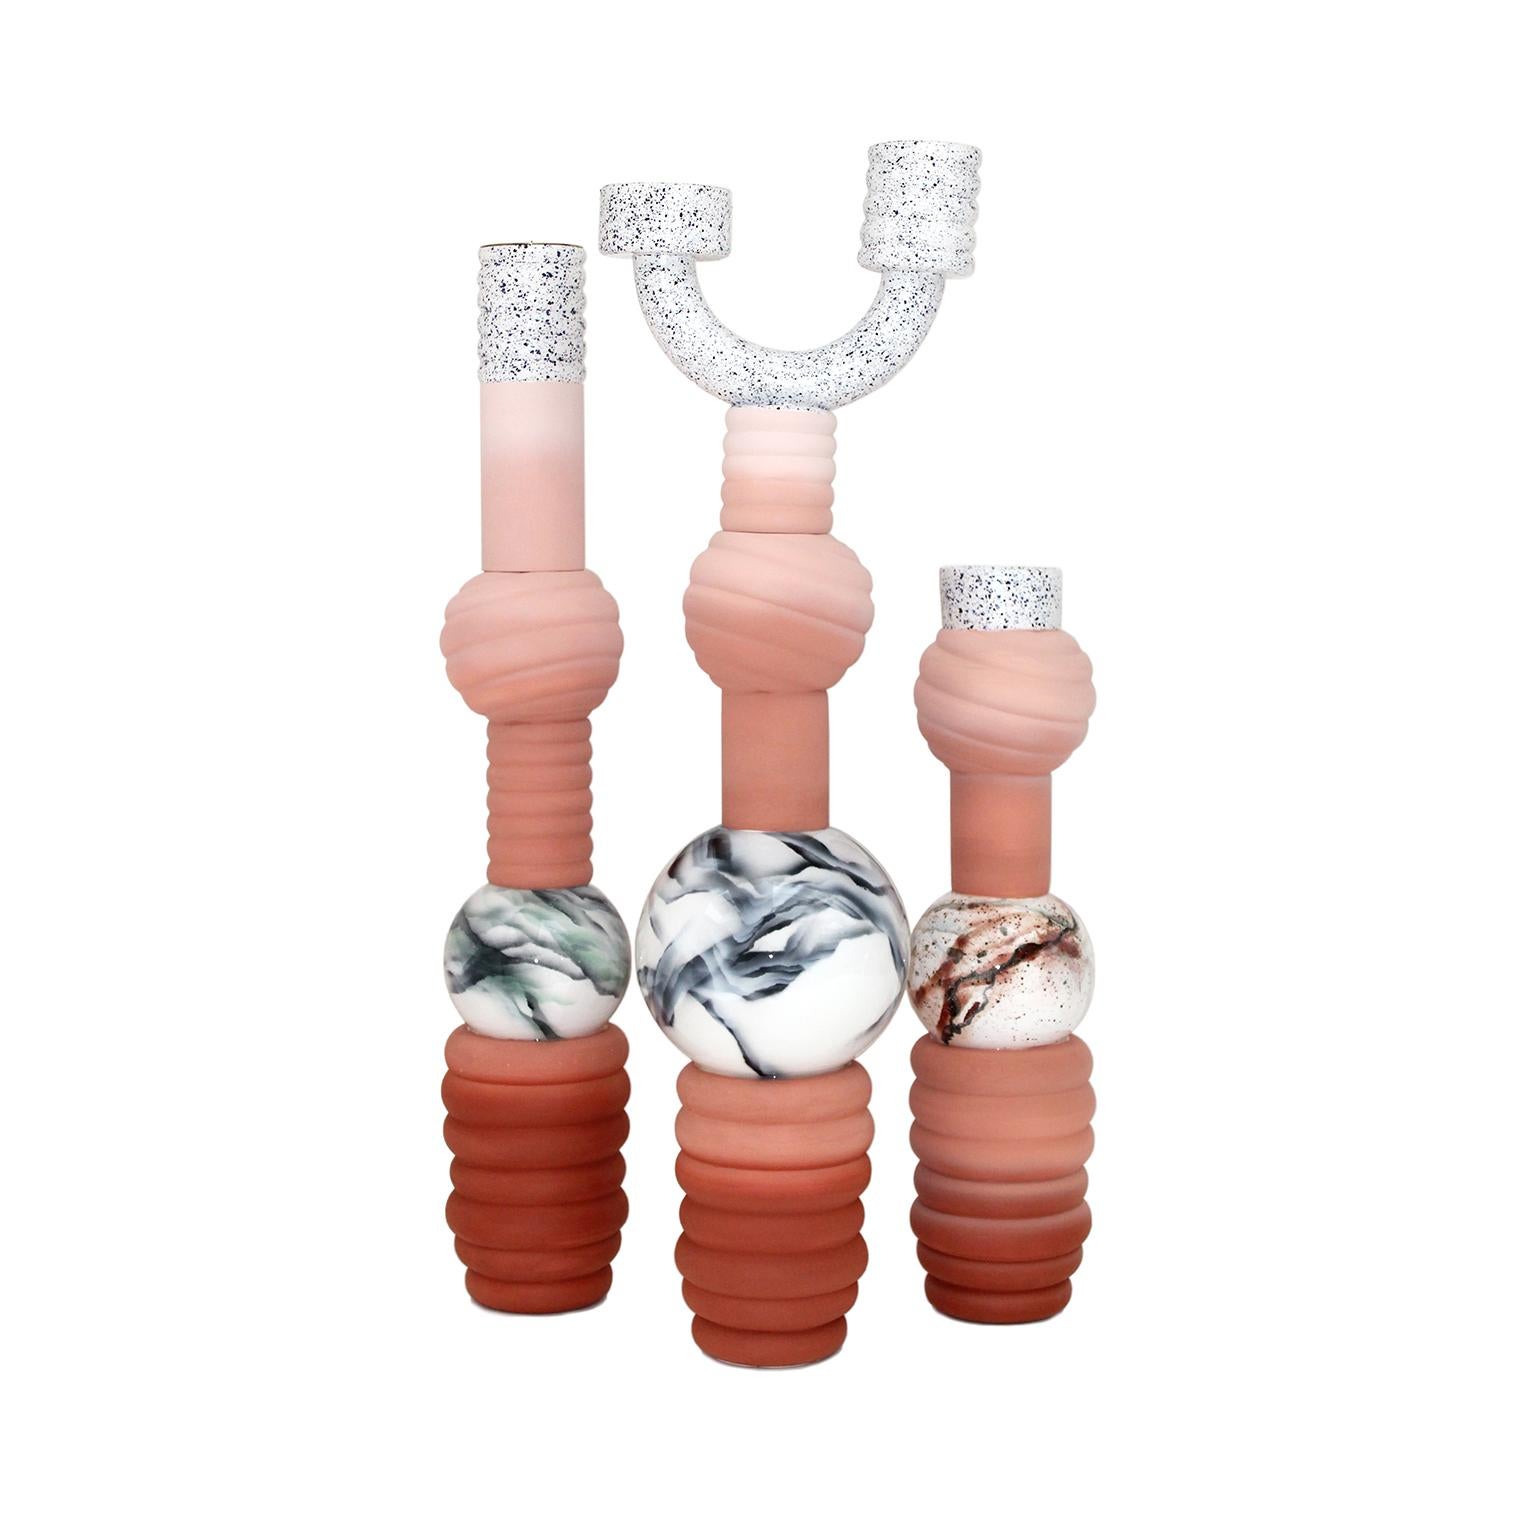 Contemporary 'Nyx 1' candelabra hand crafted ceramic by Villa Arev for French Cliché. This is Presented by French Cliché.
 
Playing with tradition Villa Arev’s Candlelabras are a remake of French church’s and family houses’ imposing